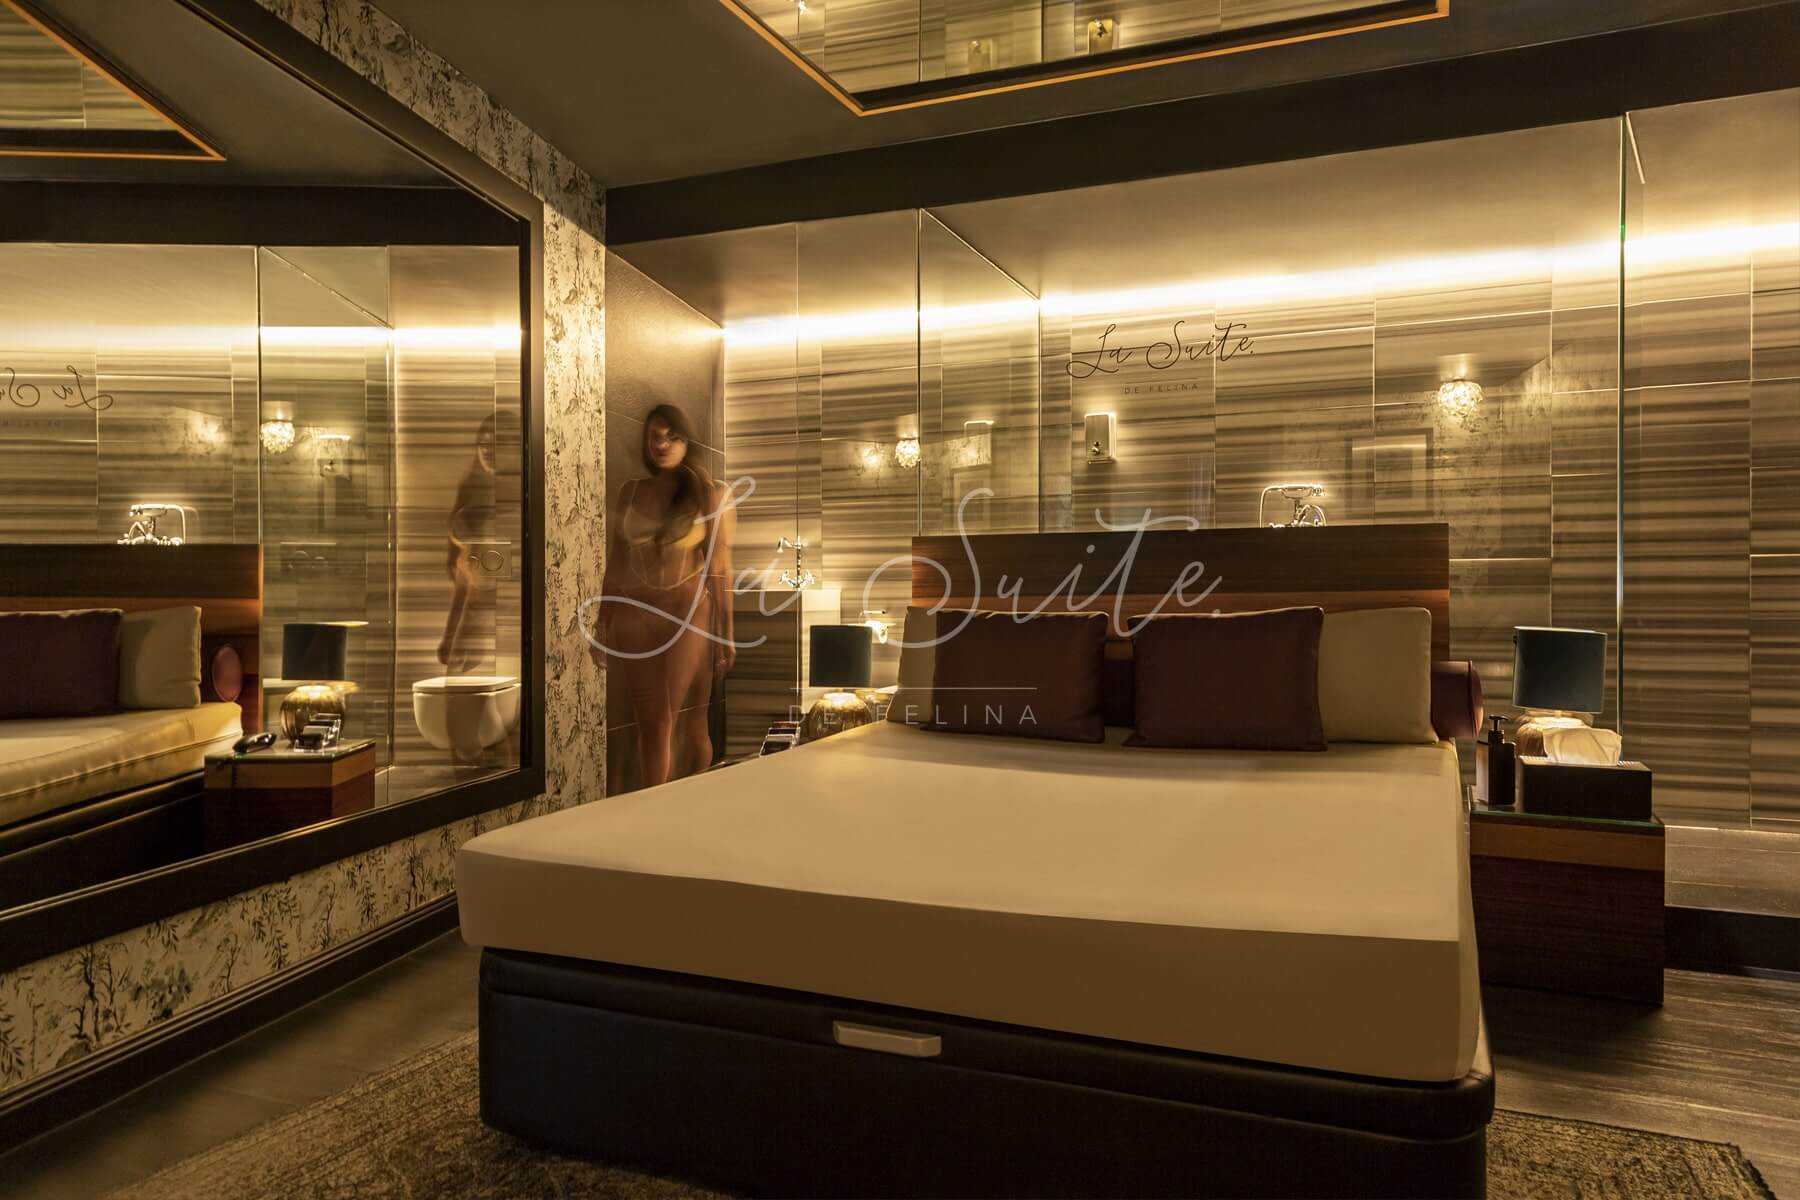 Luxurious room Distinction, with beige and black walls, wood finishes and luxury furnishings in La Suite, Barcelona